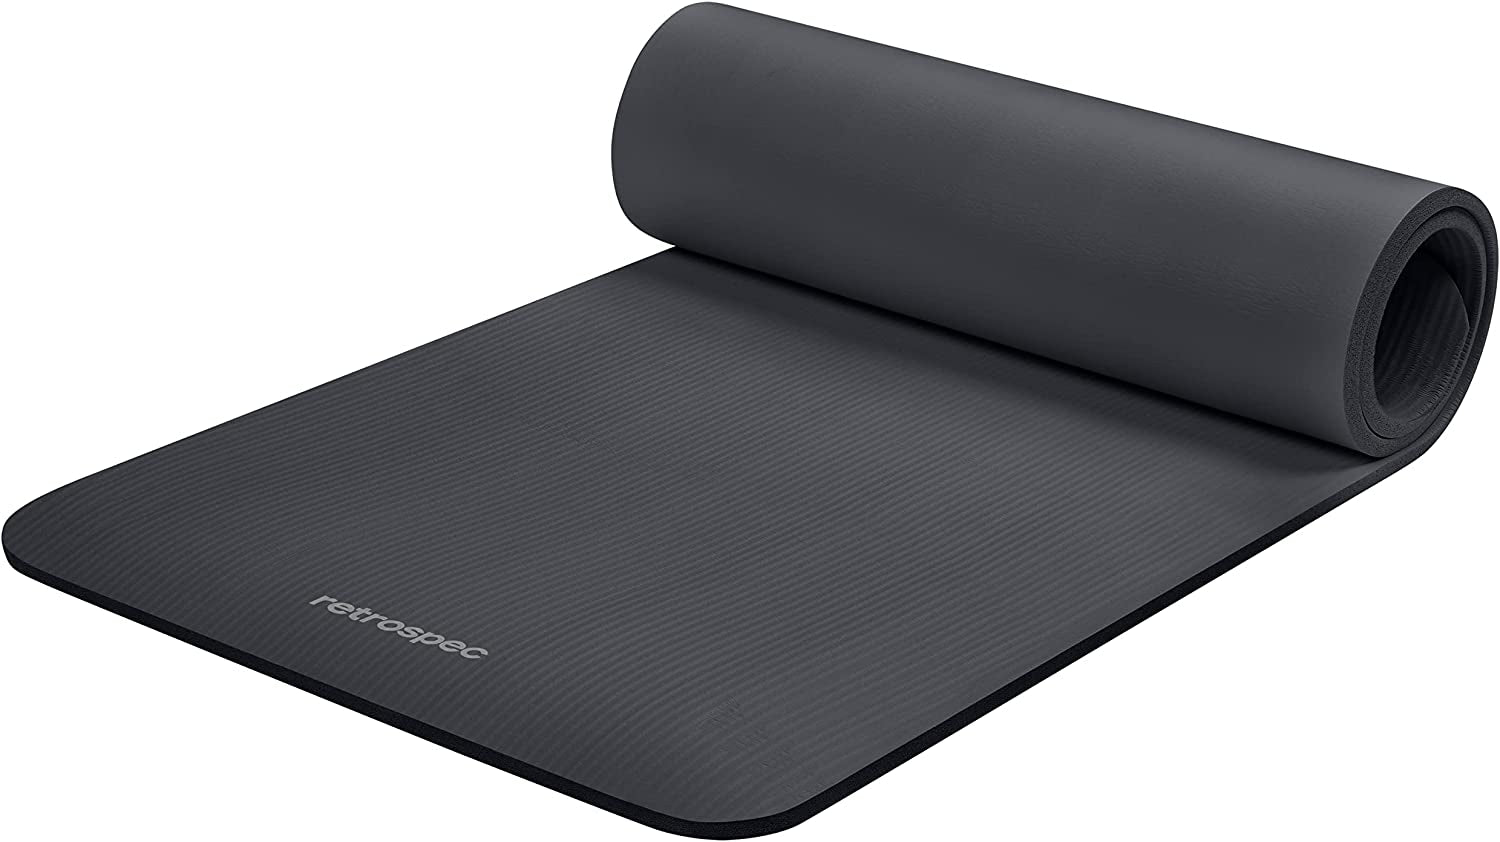 1/2" Thick Yoga Mat with Nylon Strap, Non-Slip Exercise Mat for Men and Women - Ideal for Yoga, Pilates, Stretching, Floor and Fitness Workouts